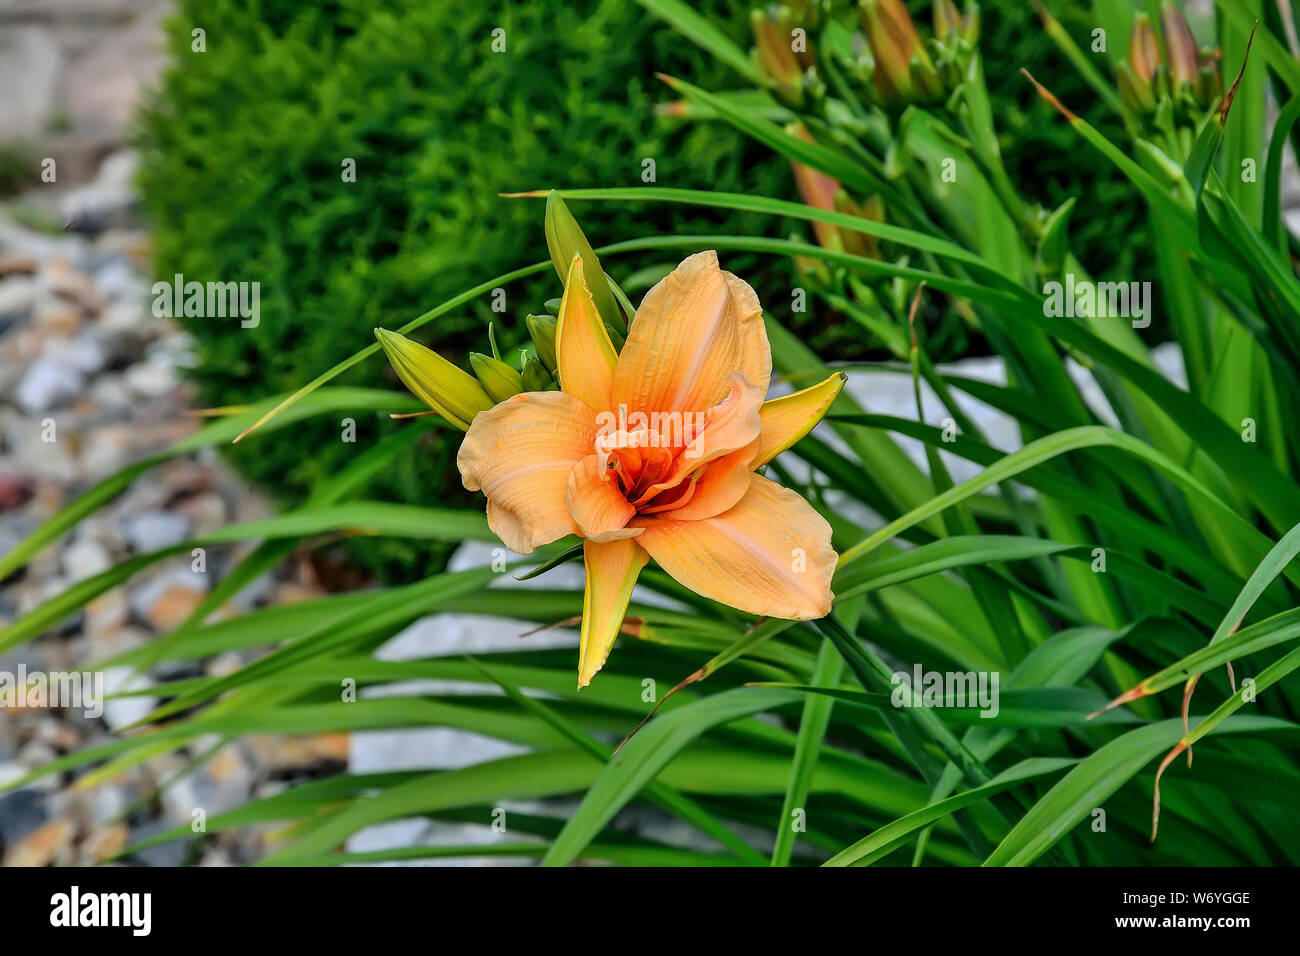 Beautiful blossoming orange Day Lily or Hemerocallis close up in the summer garden. Bright delicate flower with leaves. Gardening, floriculture and la Stock Photo